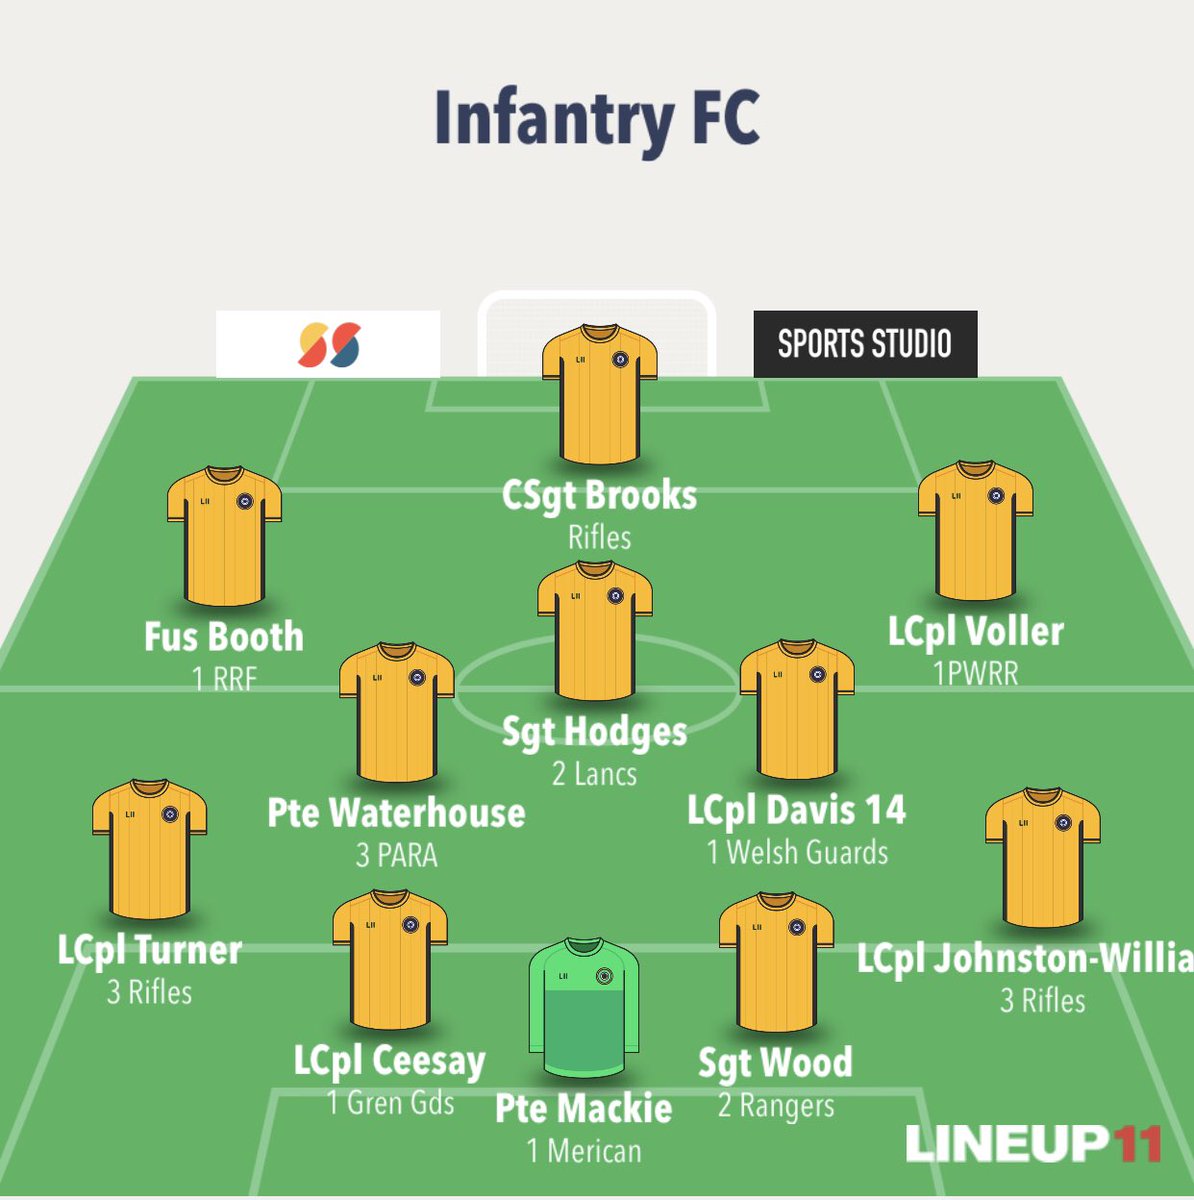 Not quite the performance we were looking for, heavy legs after 3 games in little over a week. However; it was great to see the infantry mentality of fighting right to the end. Game finished Int Corps 1 - 1 Inf FC @ArmyInfantryHQ @Armyfa1888 Sgt Colclough - 2 Para ⚽️